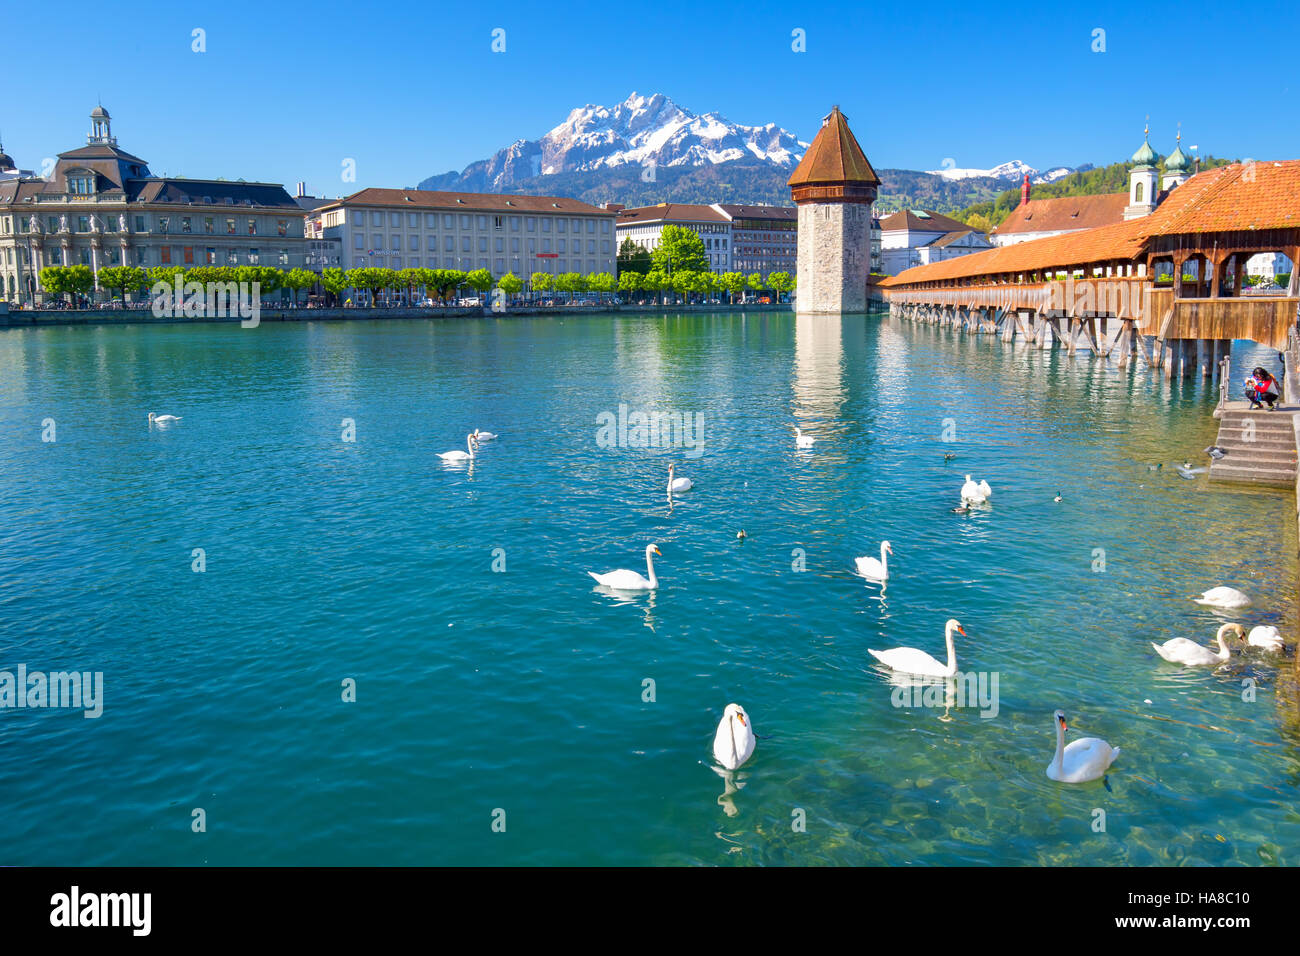 Historic city center of Lucerne with famous Chapel Bridge and lake Lucerne (Vierwaldstattersee), Canton of Luzern, Switzerland Stock Photo